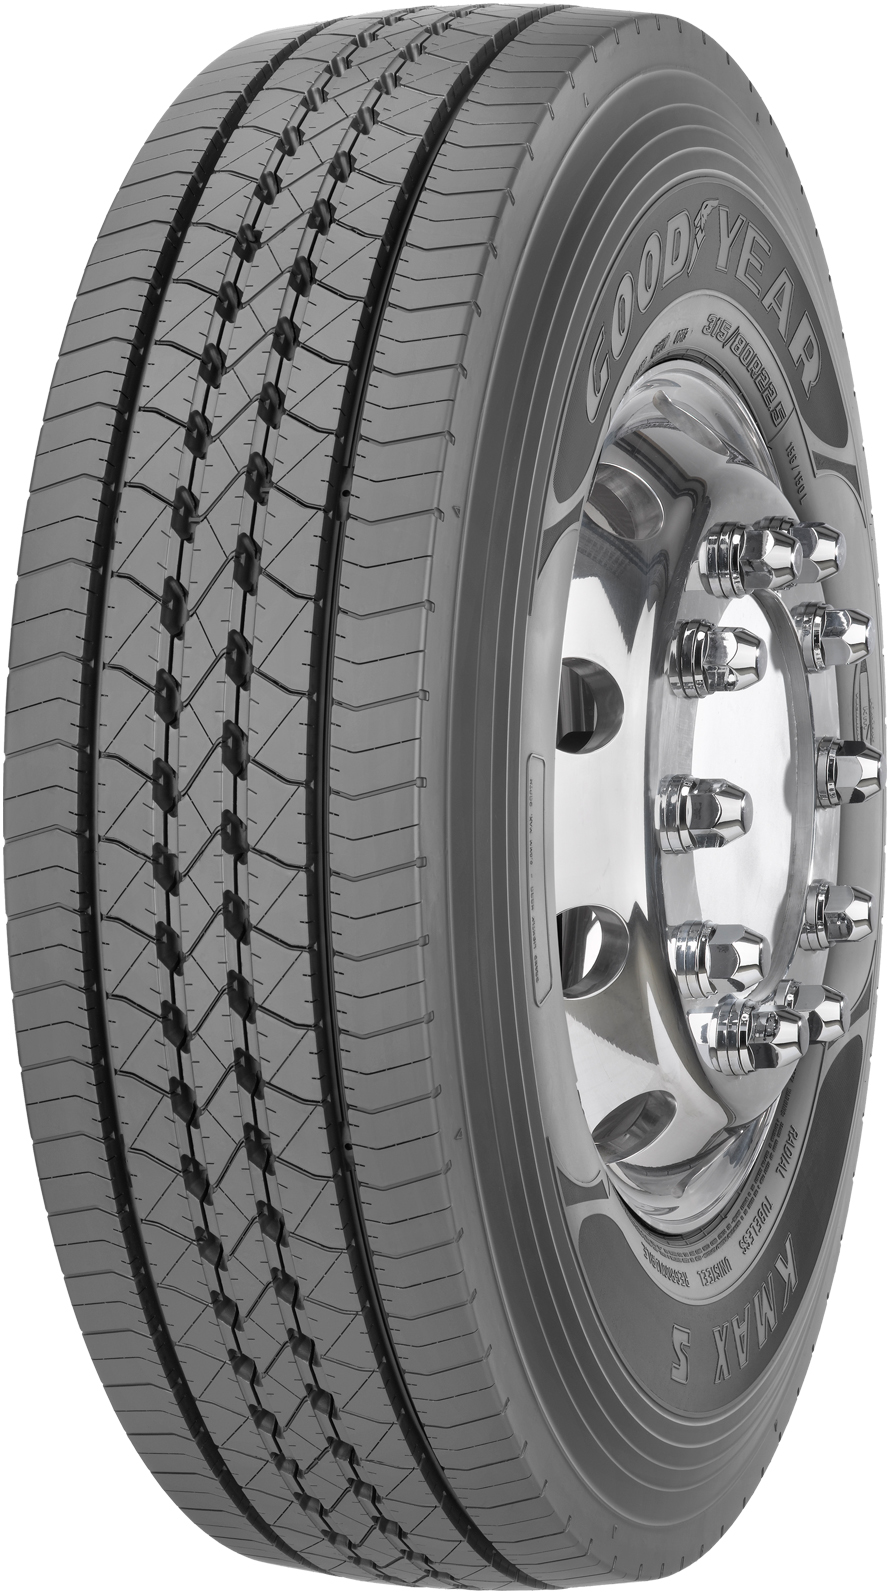 product_type-heavy_tires GOODYEAR KMAX S TL 245/70 R19.5 136M